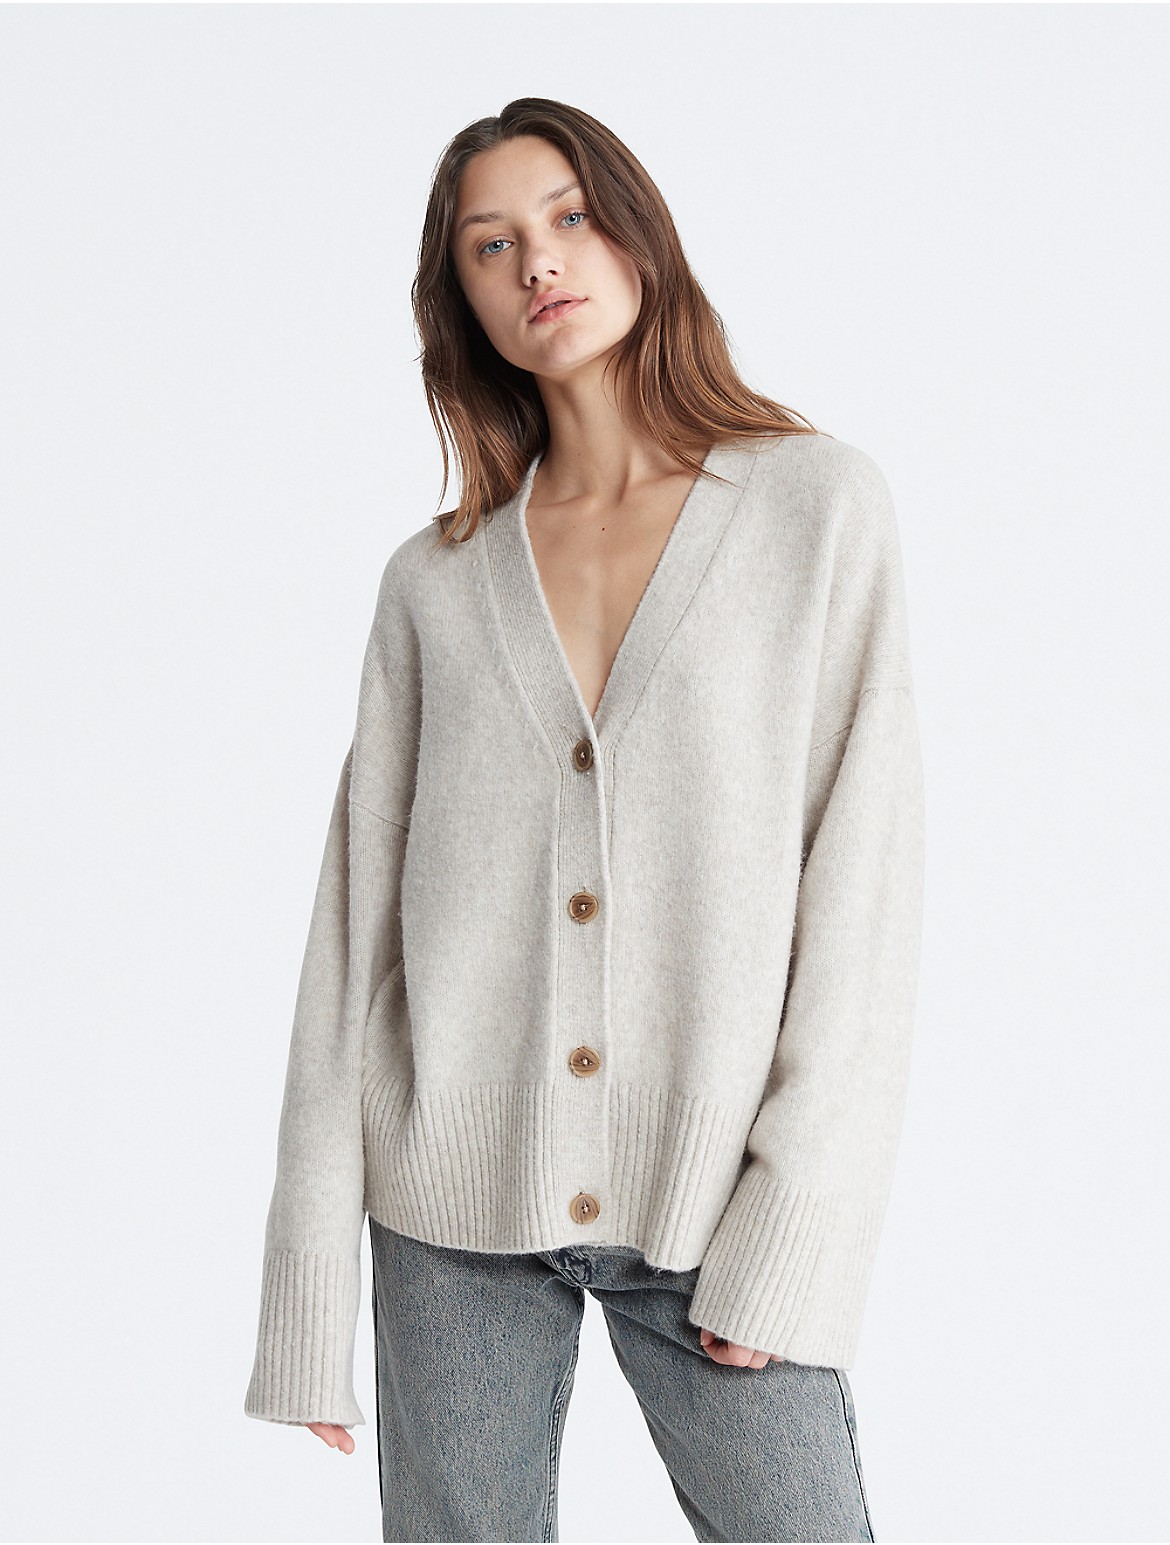 Calvin Klein Women's Oversized Relaxed Fit Cardigan - Neutral - XS